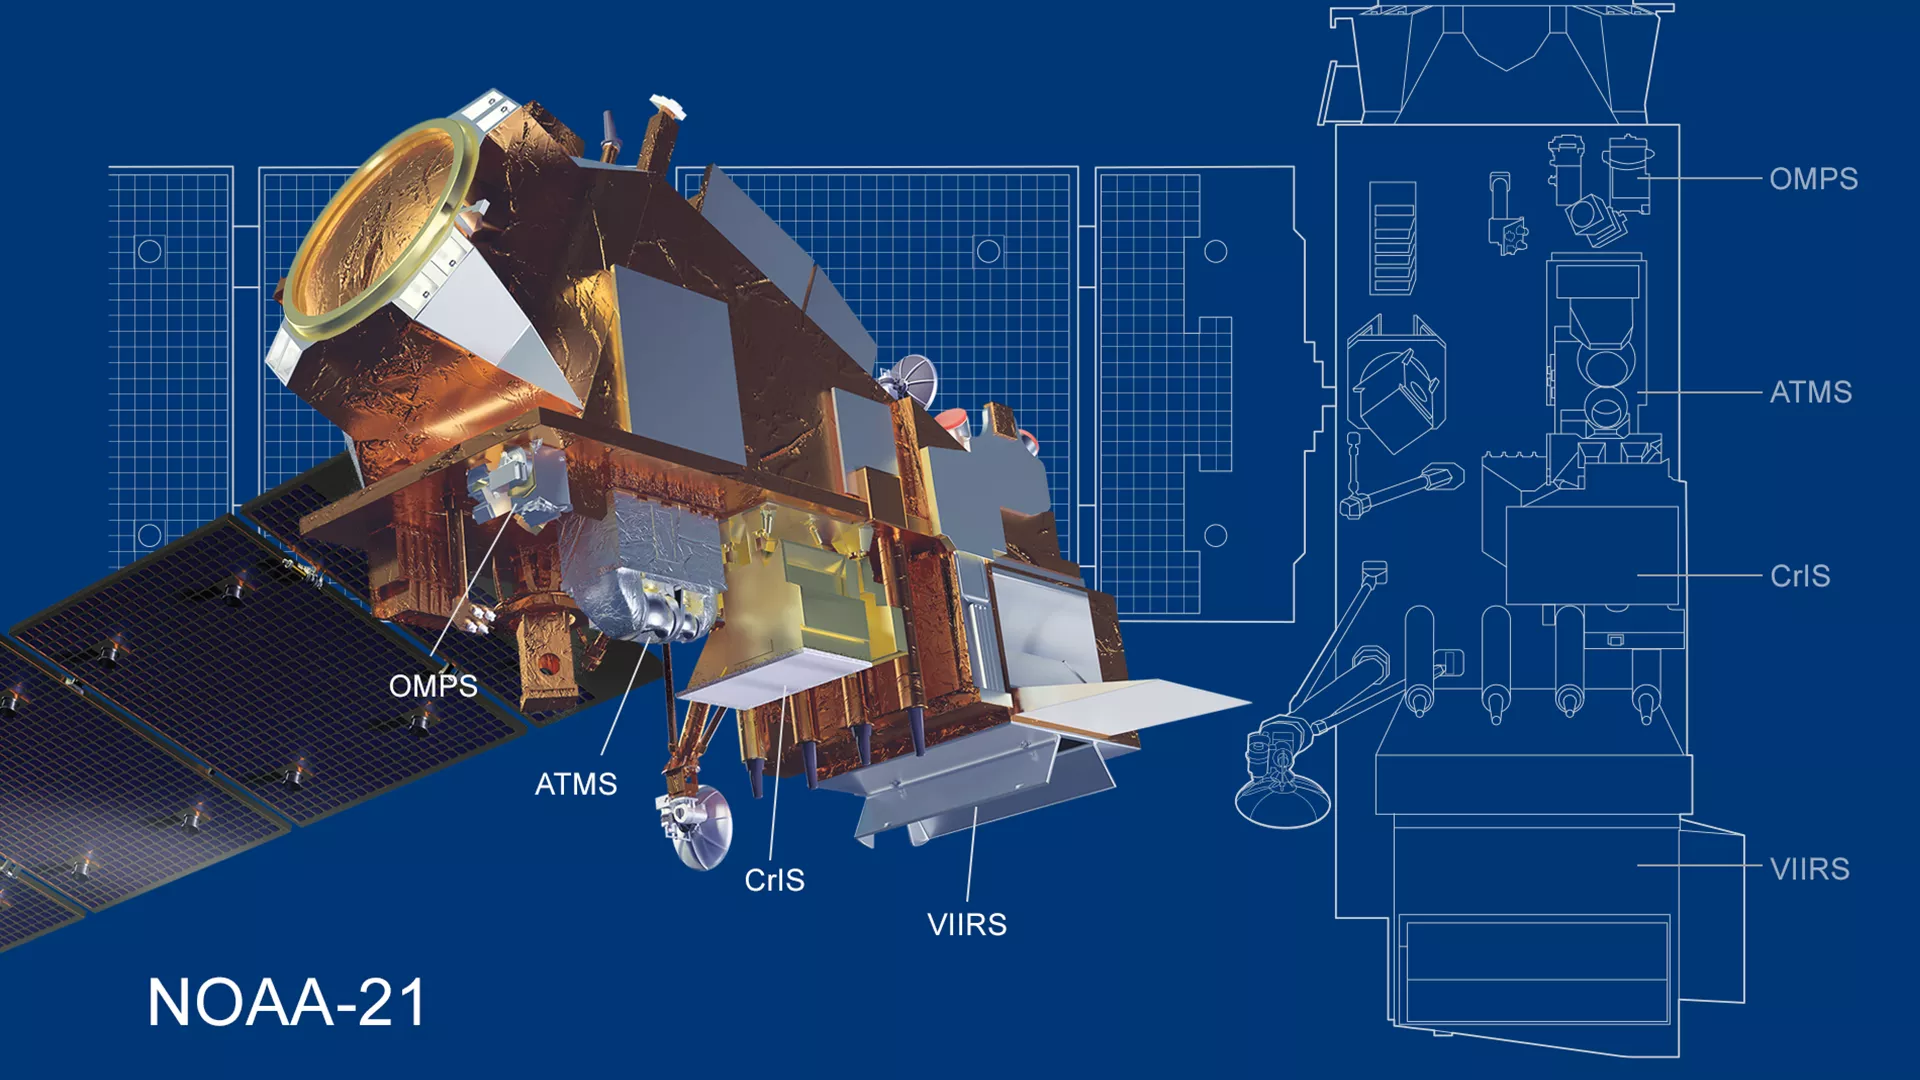 Image of the NOAA-21 Satellite and instruments